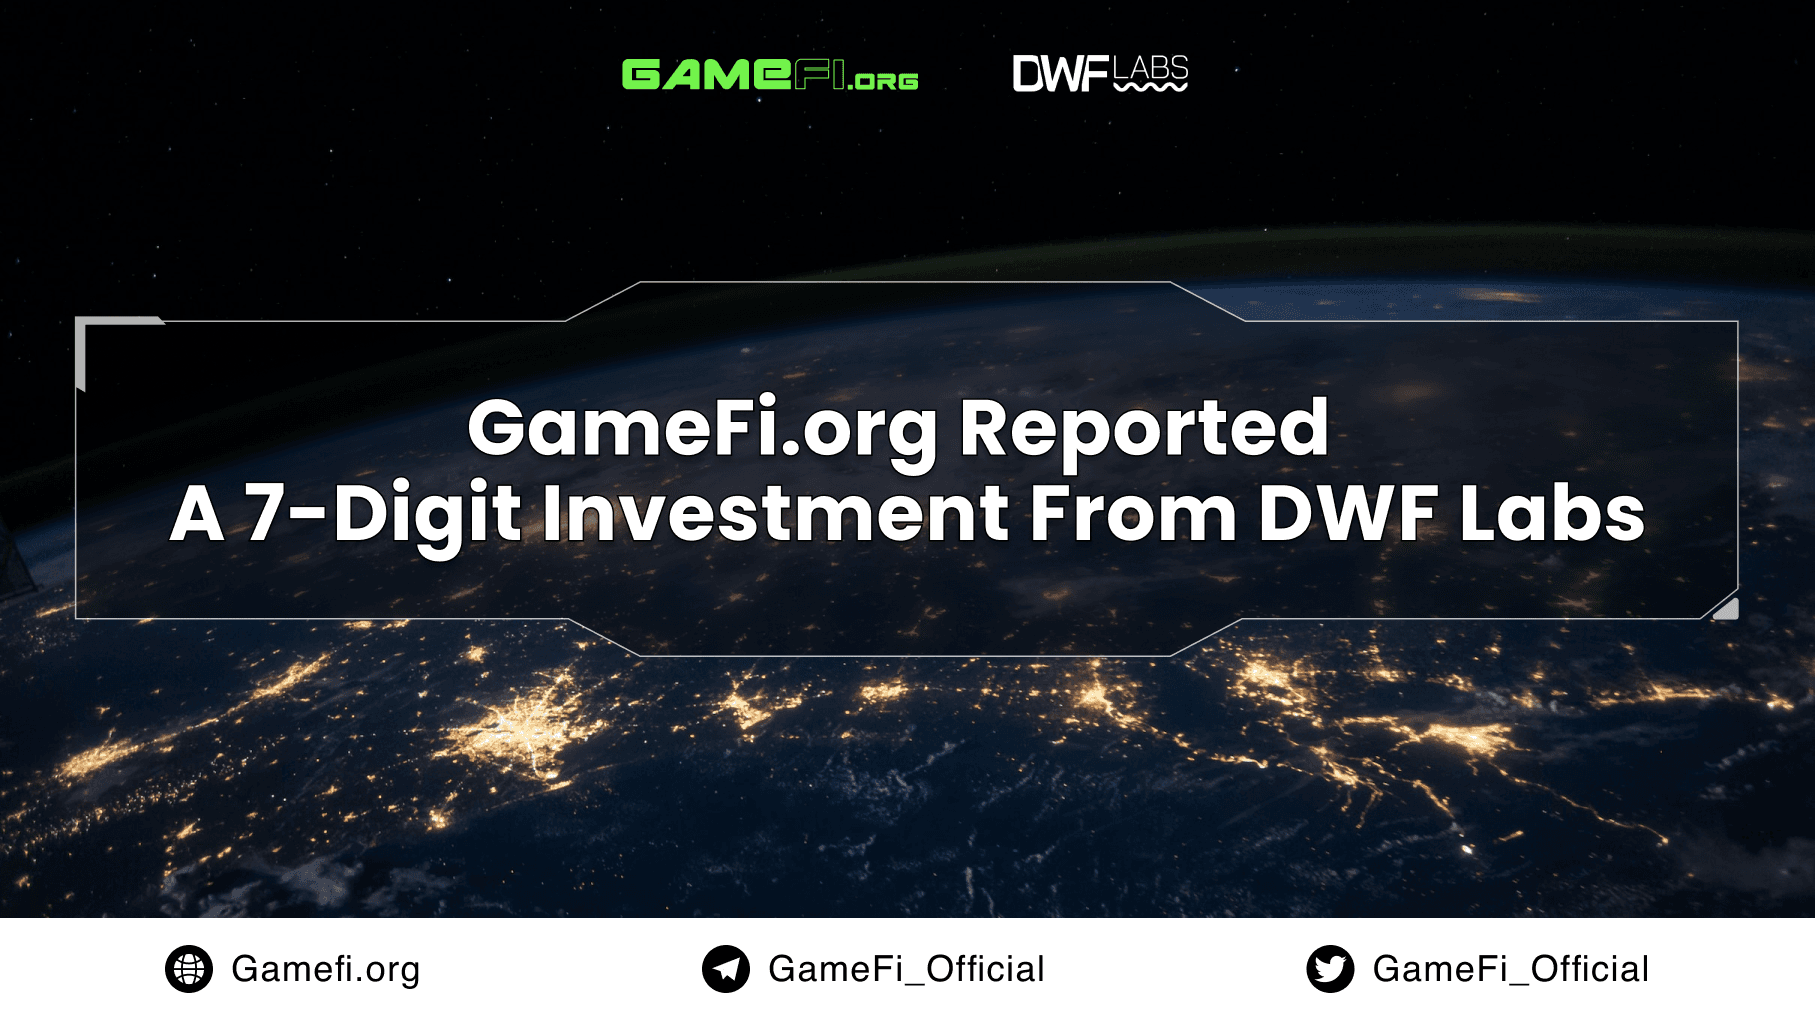 GameFi.org Reported A 7-Digit Investment From DWF Labs